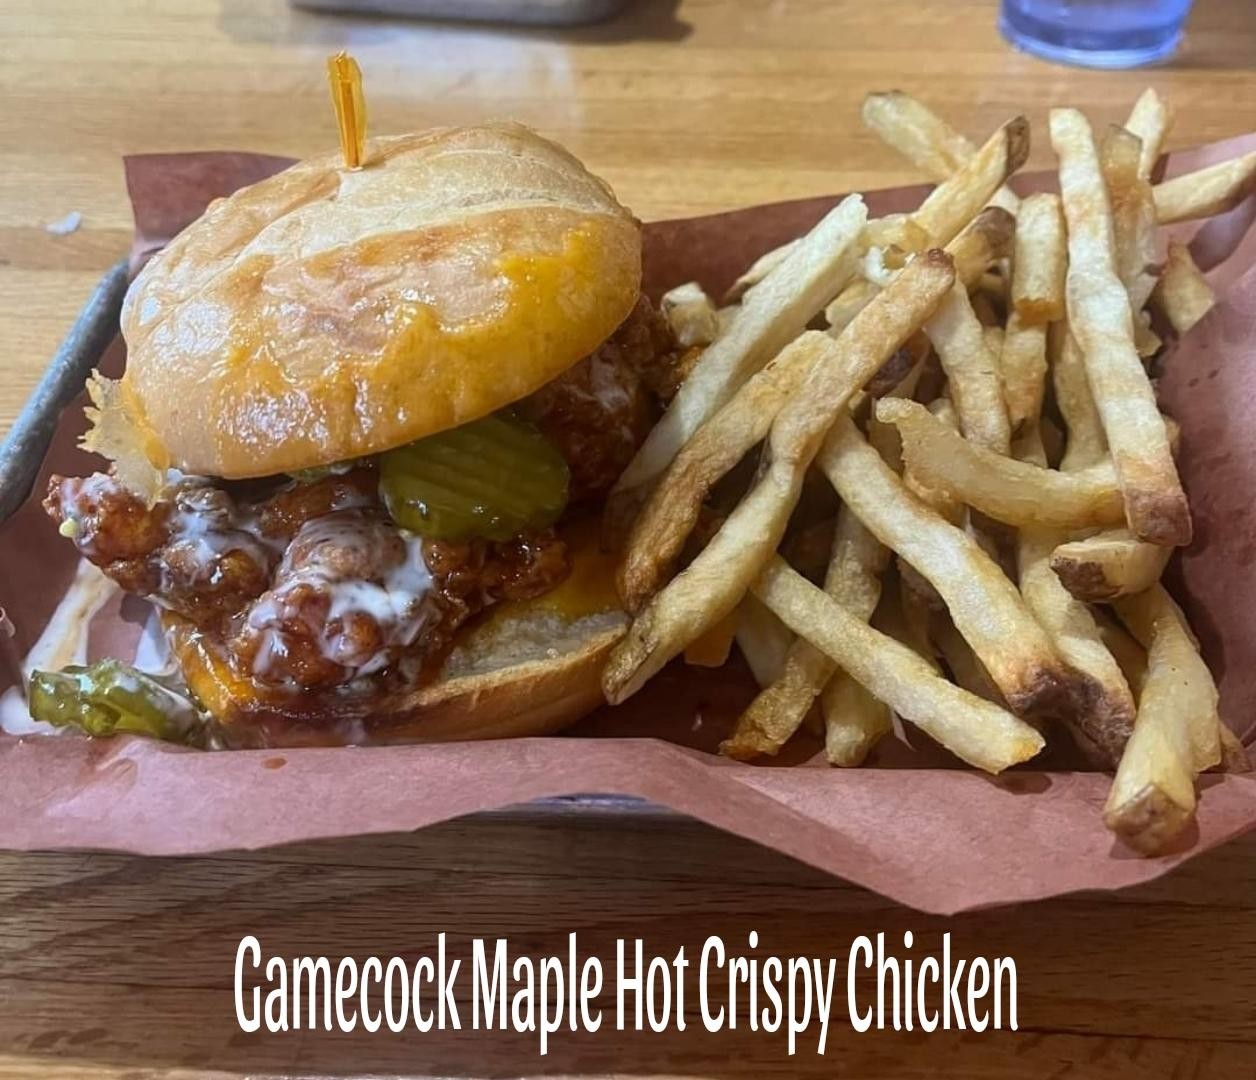 The Game Cock Maple Hot Chicken